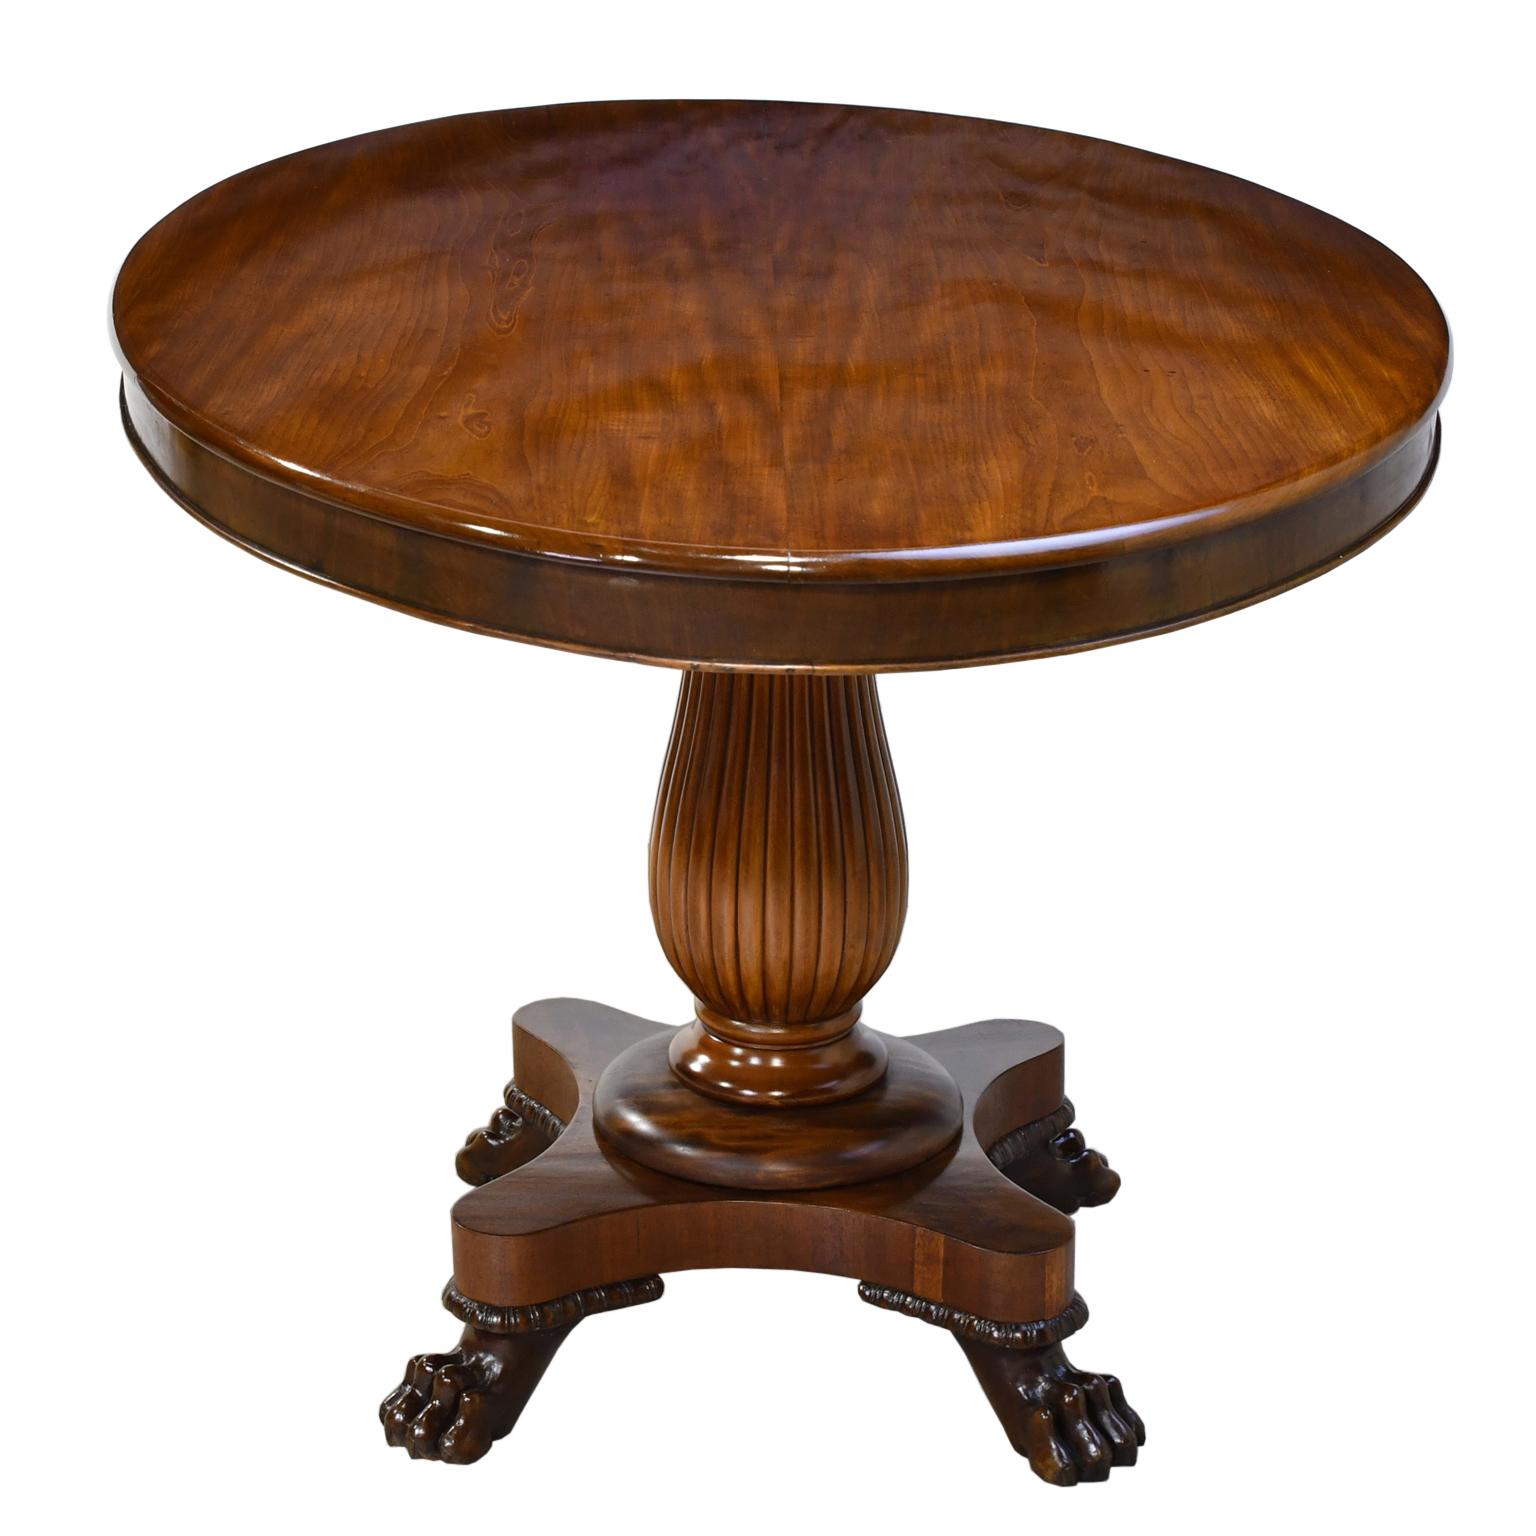 Empire Pedestal Table in West Indies Mahogany w/ Oval Top, Denmark, circa 1825 1